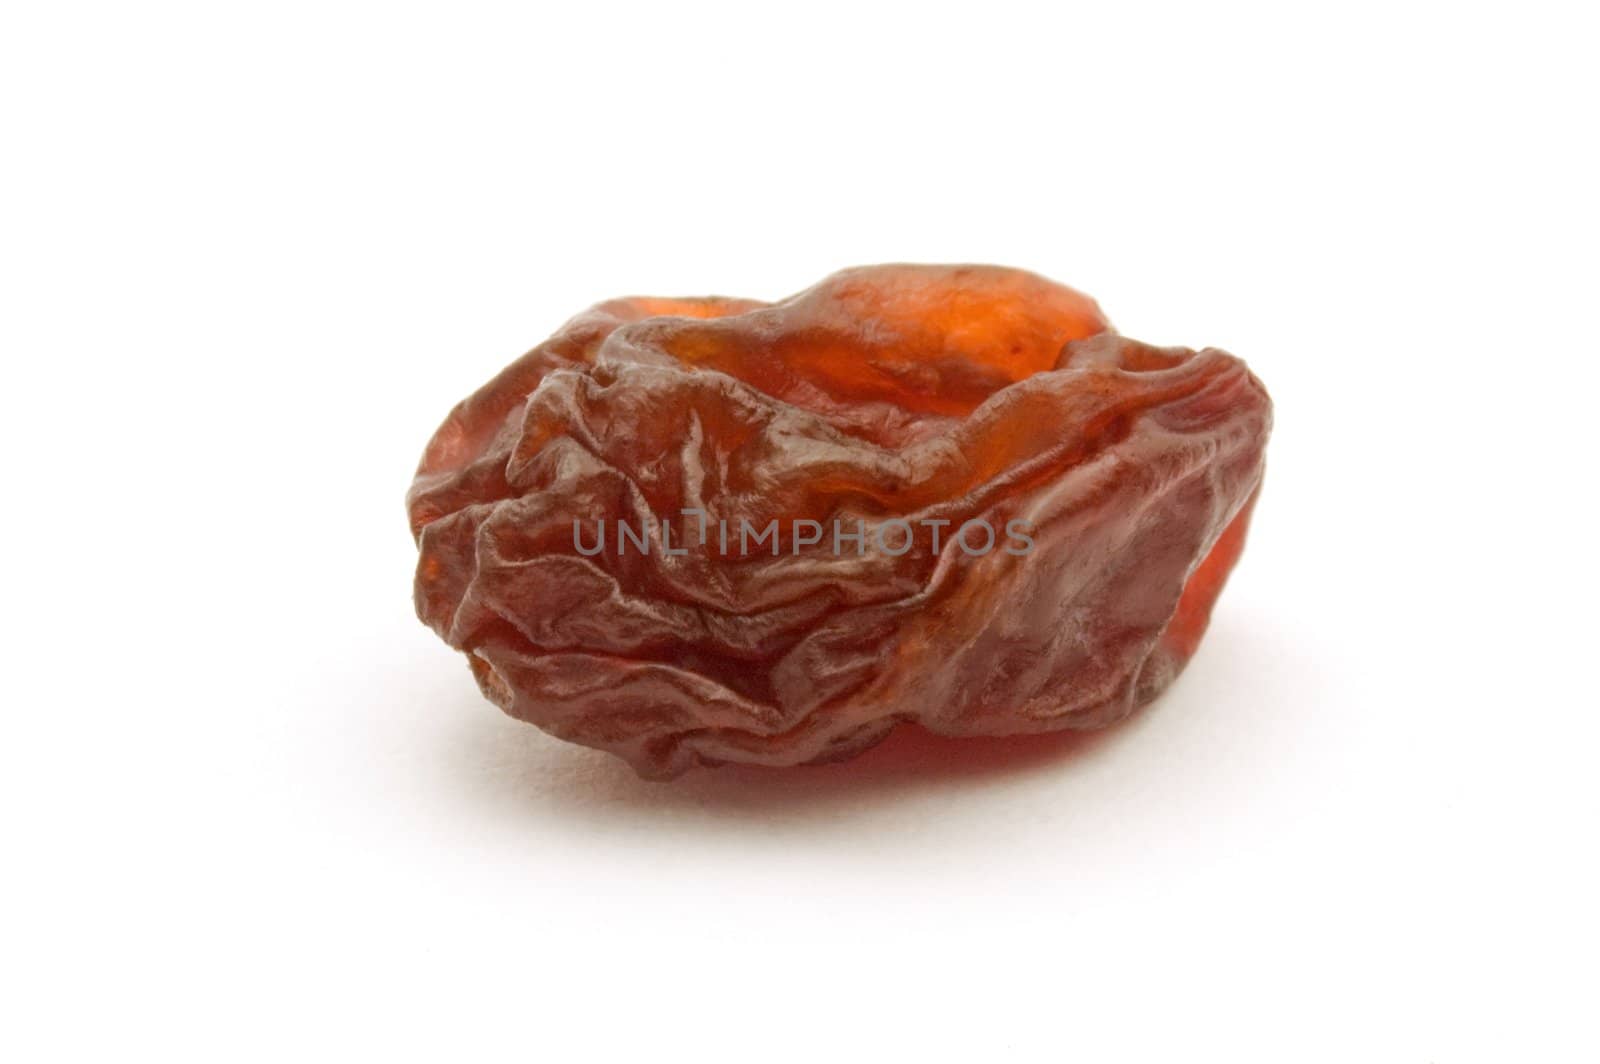 dried brown raisin isolated on white background